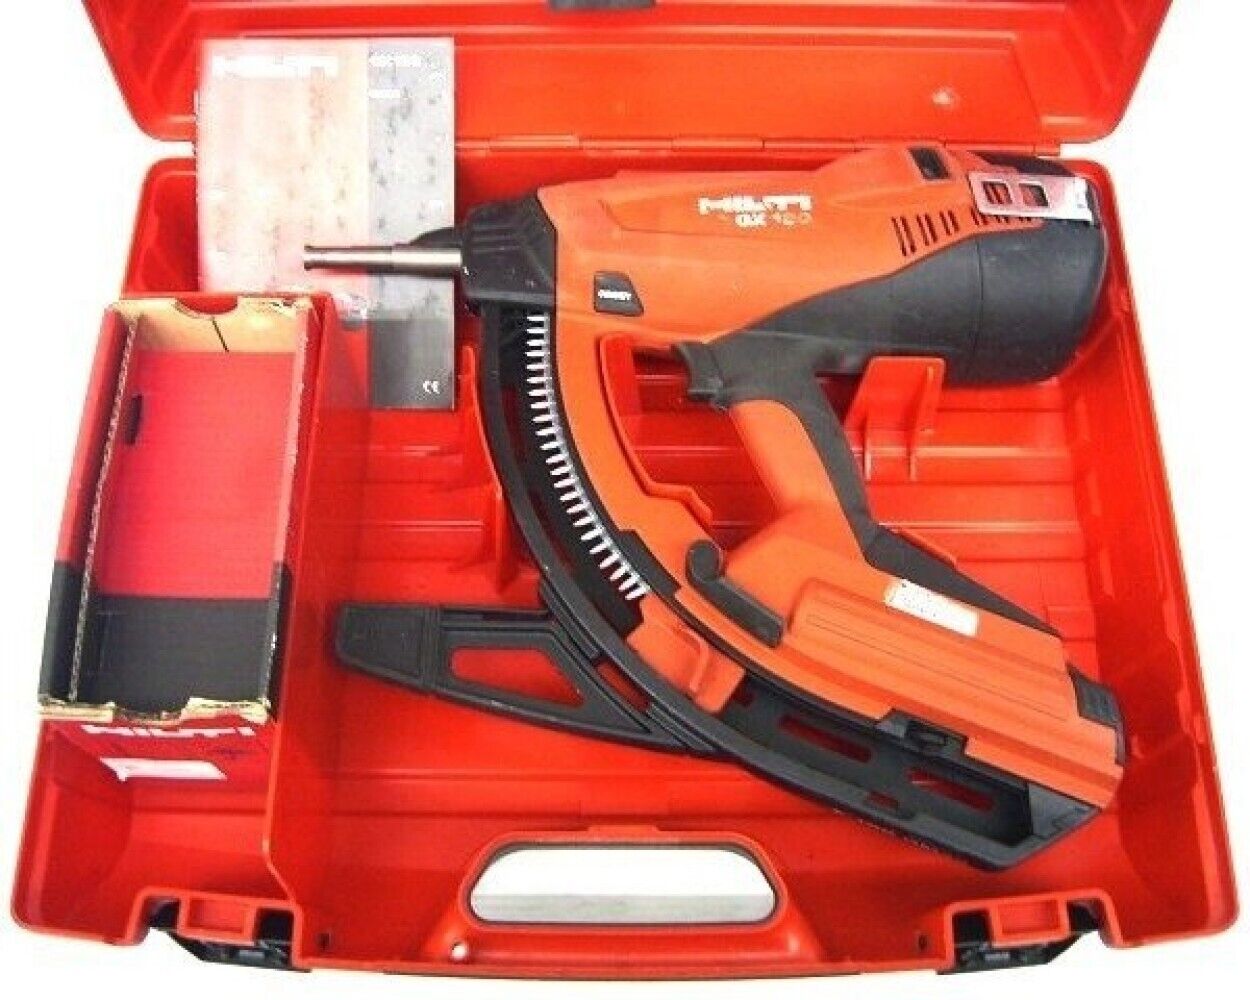 Used Hilti GX 120-ME Gas Powered Actuated Fastener Nail Gun with Case 2407031